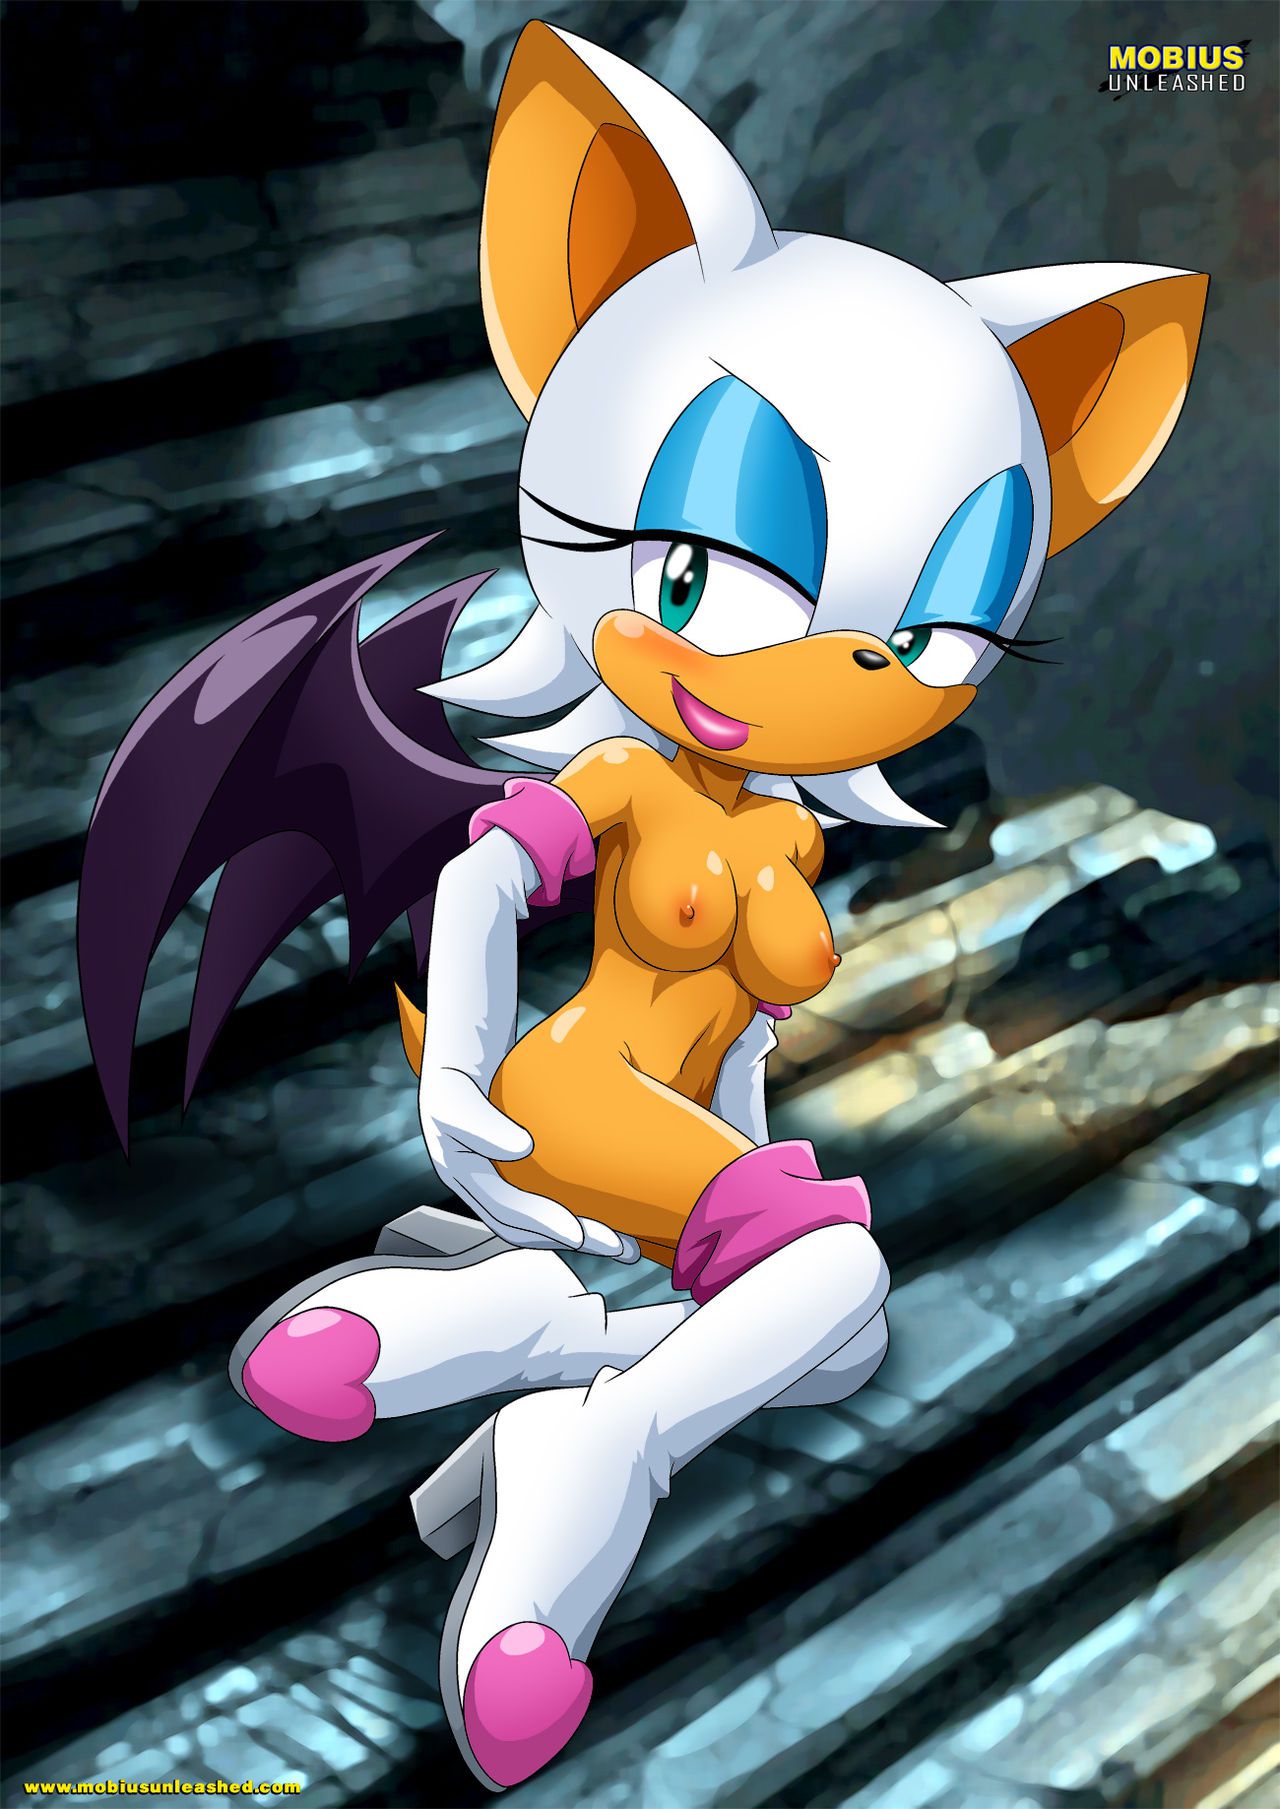 Mobius Unleashed: Rouge the Bat 74